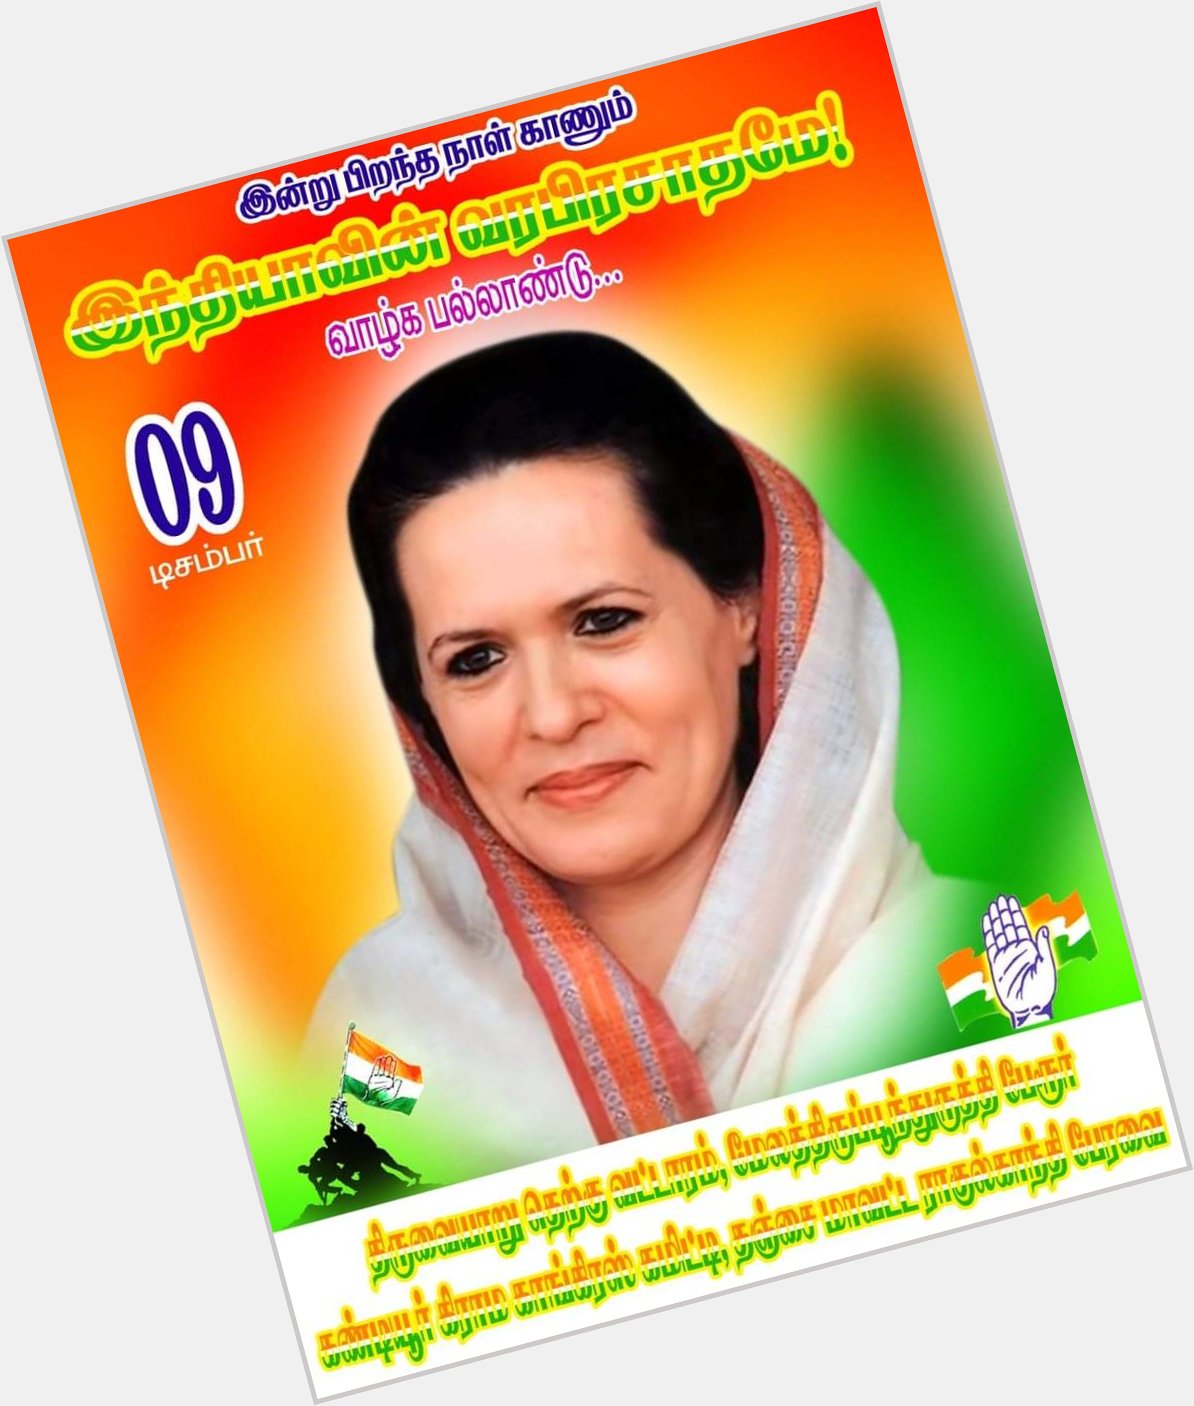 Congress President Smt. Sonia Gandhi\s Birthday, let\s Wish her a Happy Birthday and long life. 